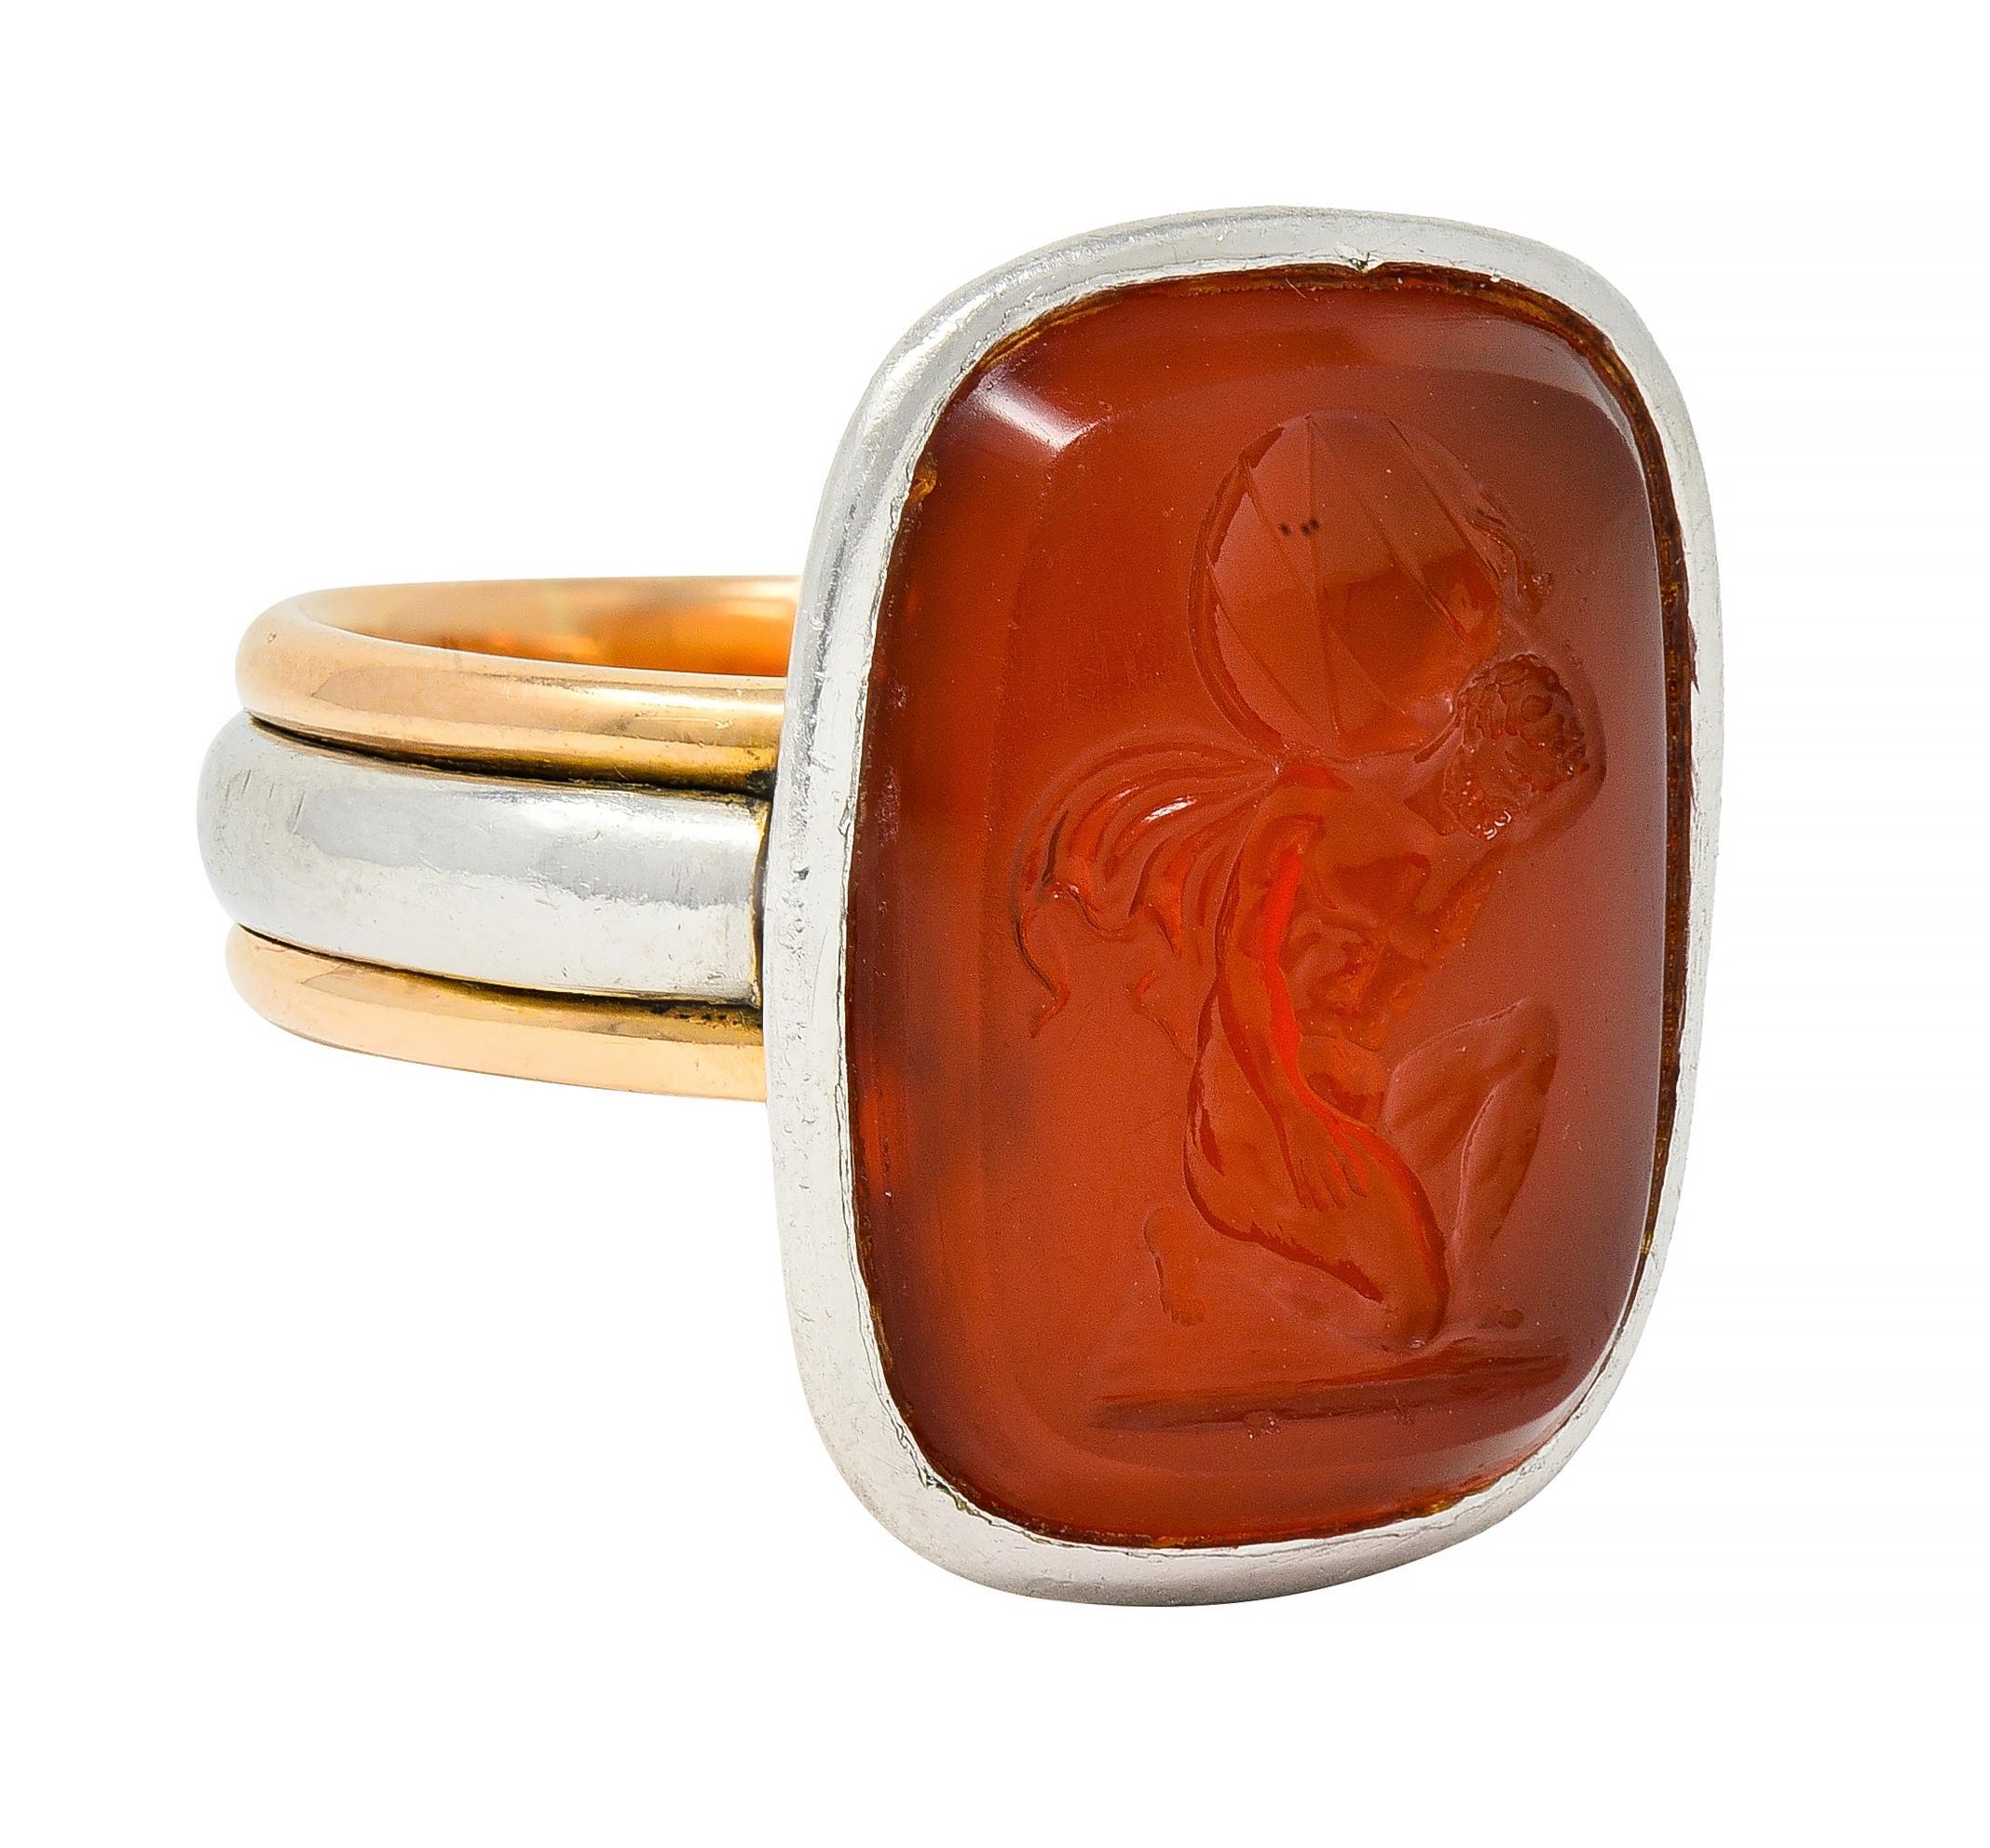 Centering a cushion-shaped carnelian tablet measuring 16.5 x 20.7 mm - translucent reddish orange 
Set in a platinum bezel surround 
Band features a rounded platinum center flanked by raised rose gold edges
Tested as platinum and 18 karat